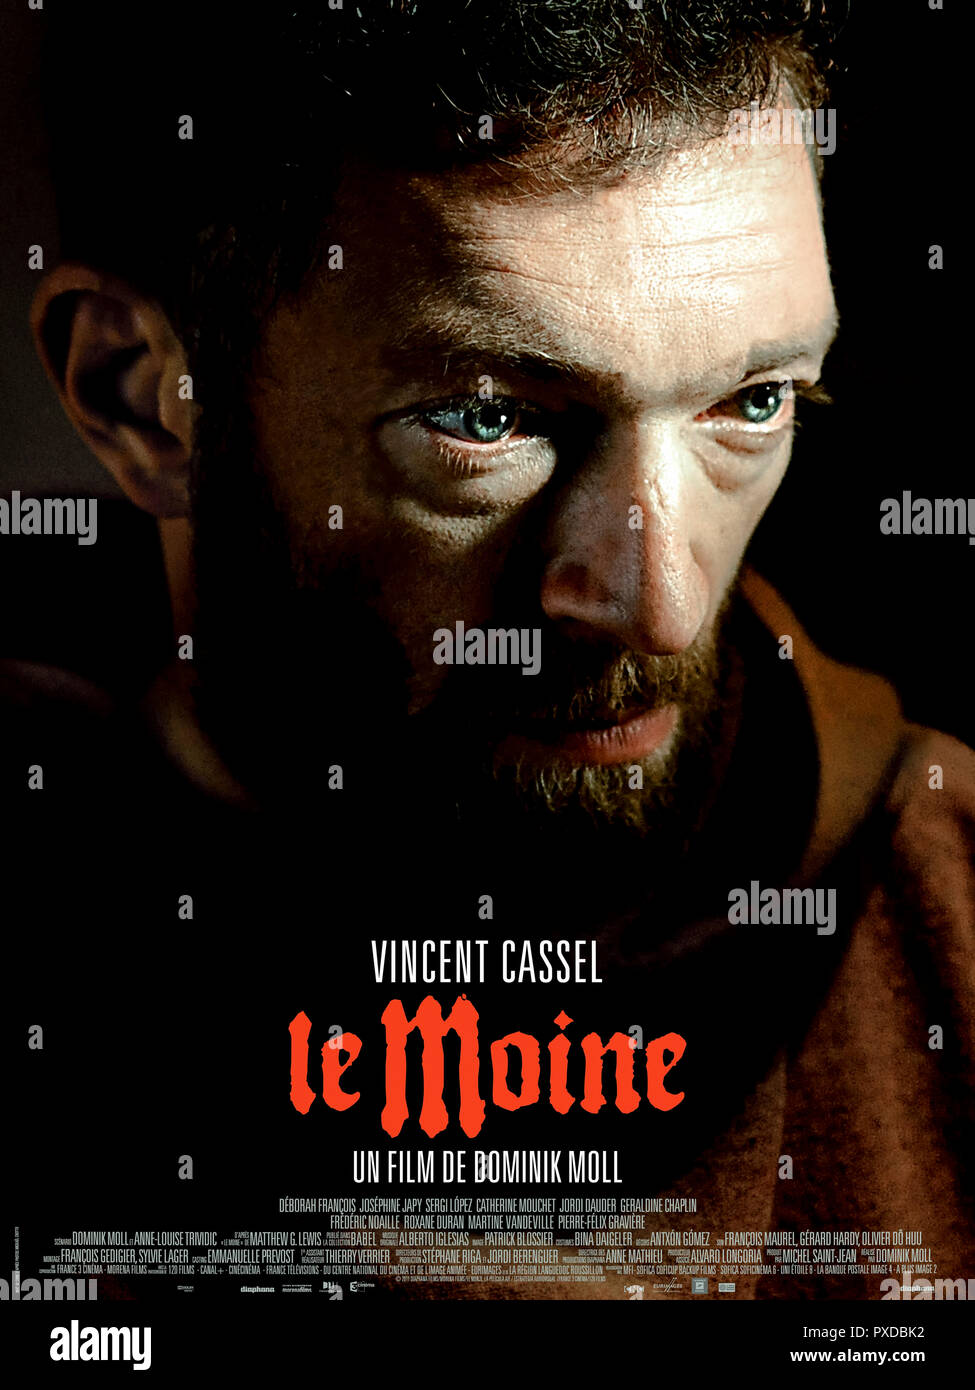 Le Moine (The Monk) (2011) directed by Dominik Moll and starring Vincent Cassel, Déborah François, Joséphine Japy and Sergi López. Adaptation of Matthew G. Lewis’ 1796 Gothic novel about romantic obsession and corruption. Stock Photo